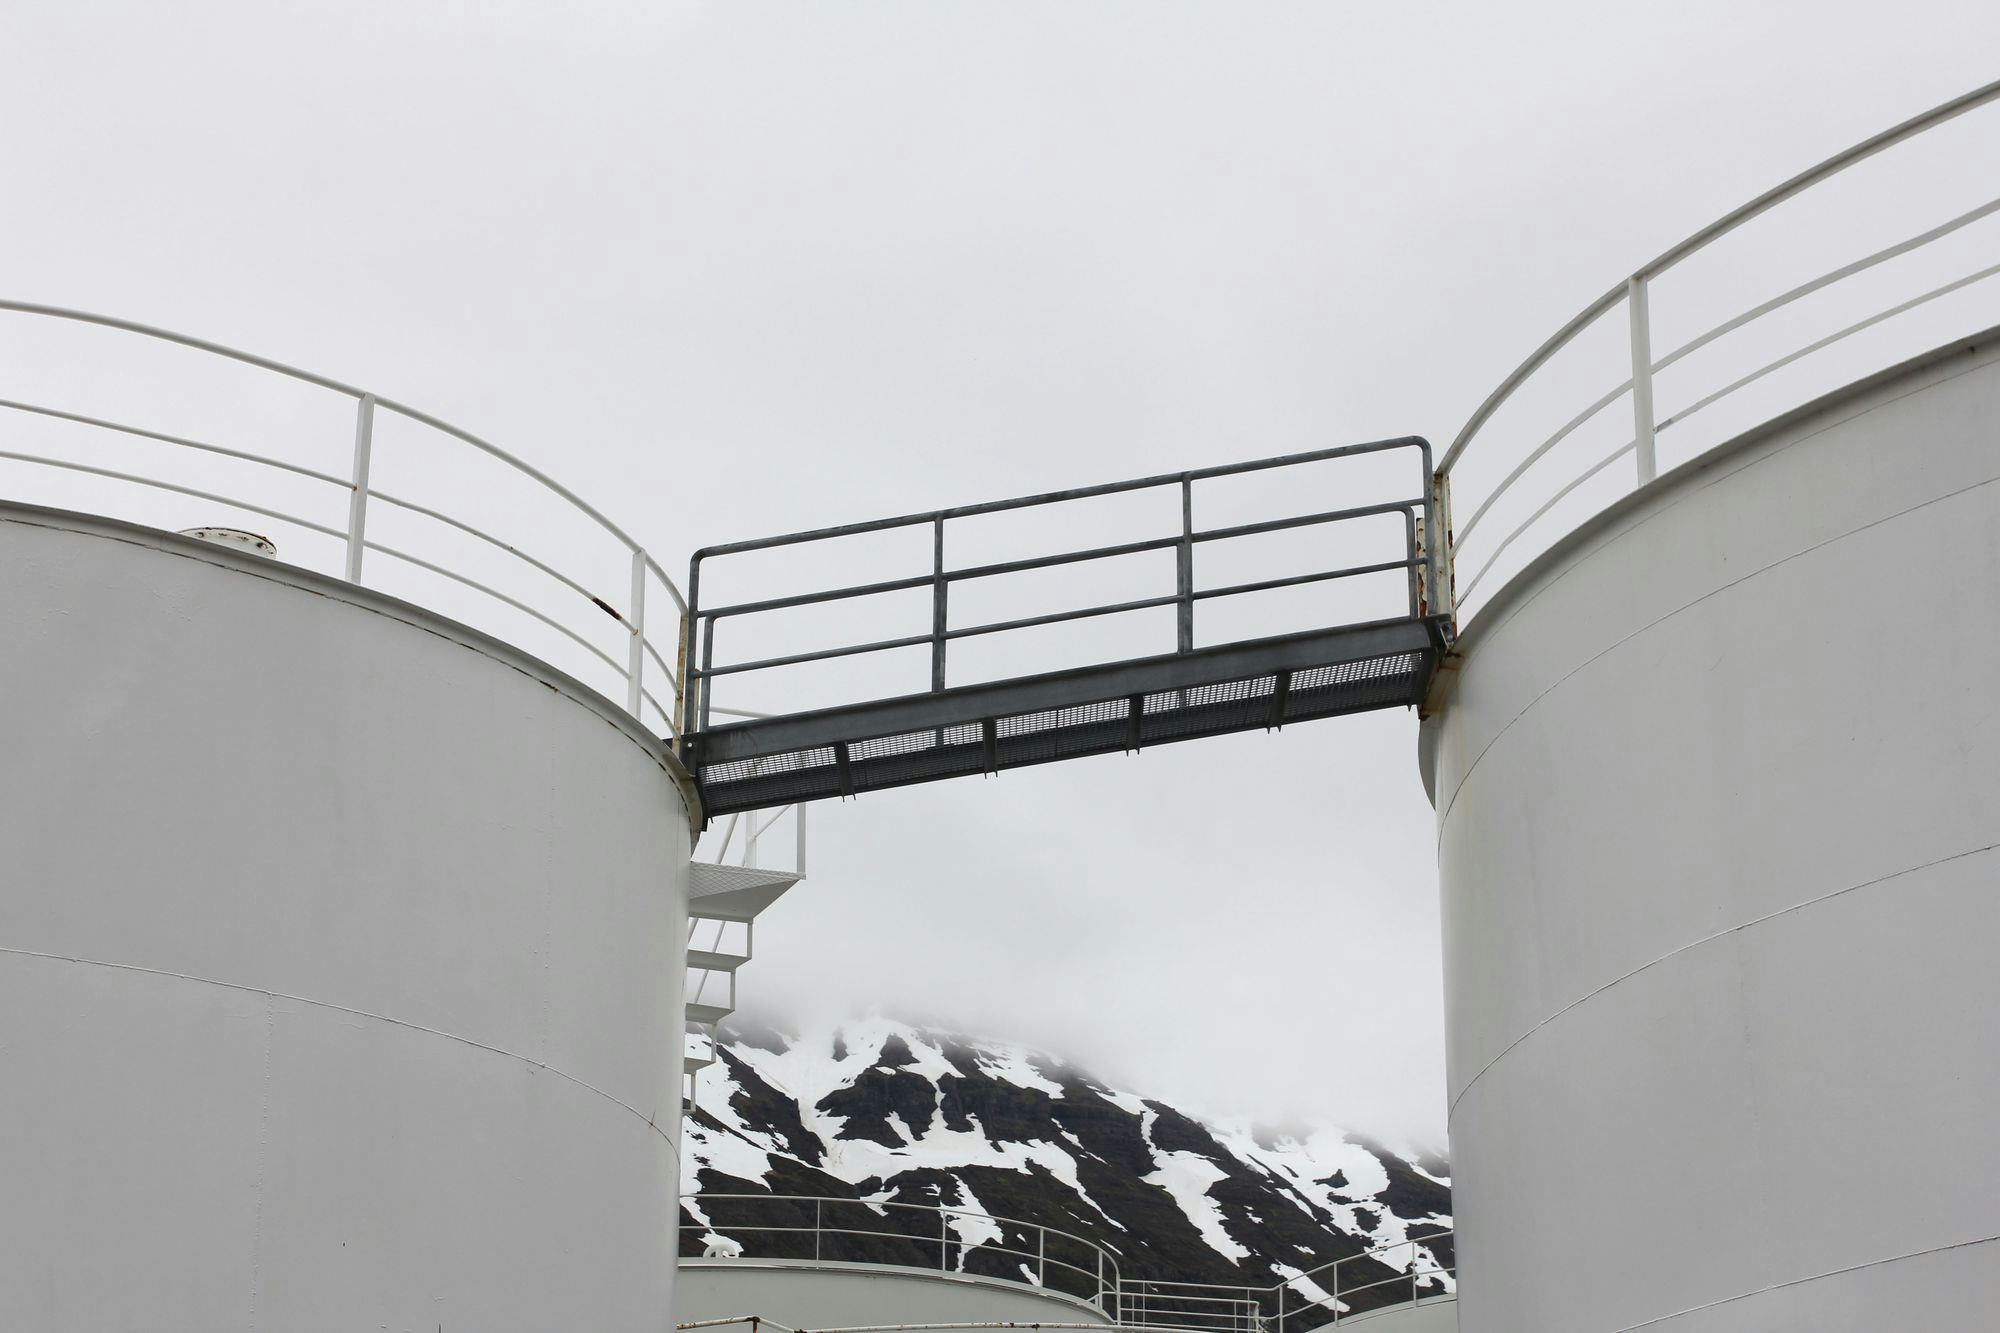 Two white tanks on each side of the photo, a bridge connecting the tanks. Snowy mountains in the back covered with clouds